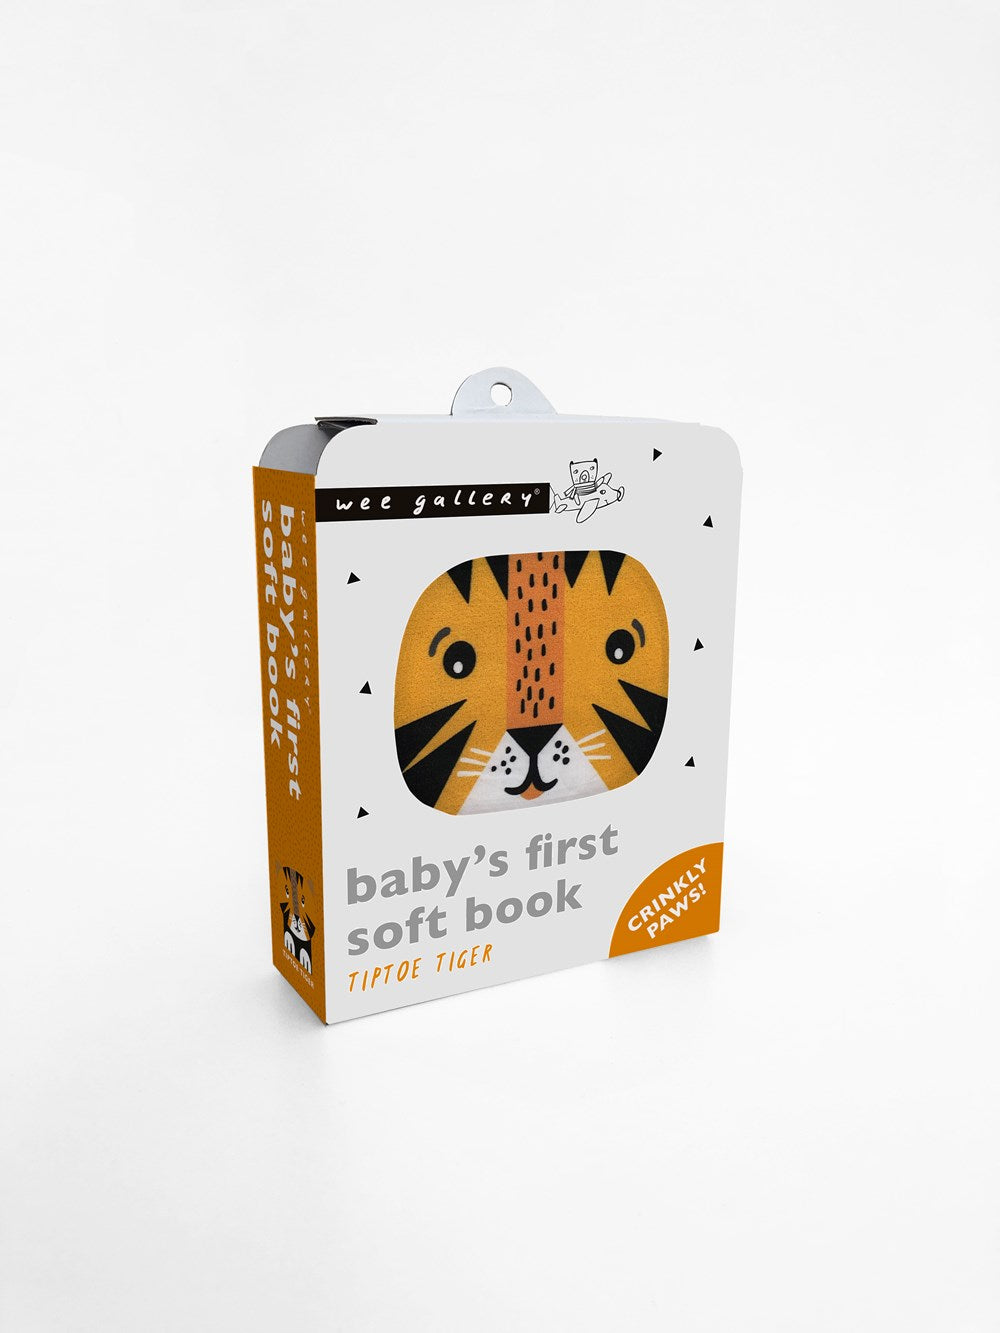 Wee Gallery Tiptoe Tiger: Baby's First Soft Book